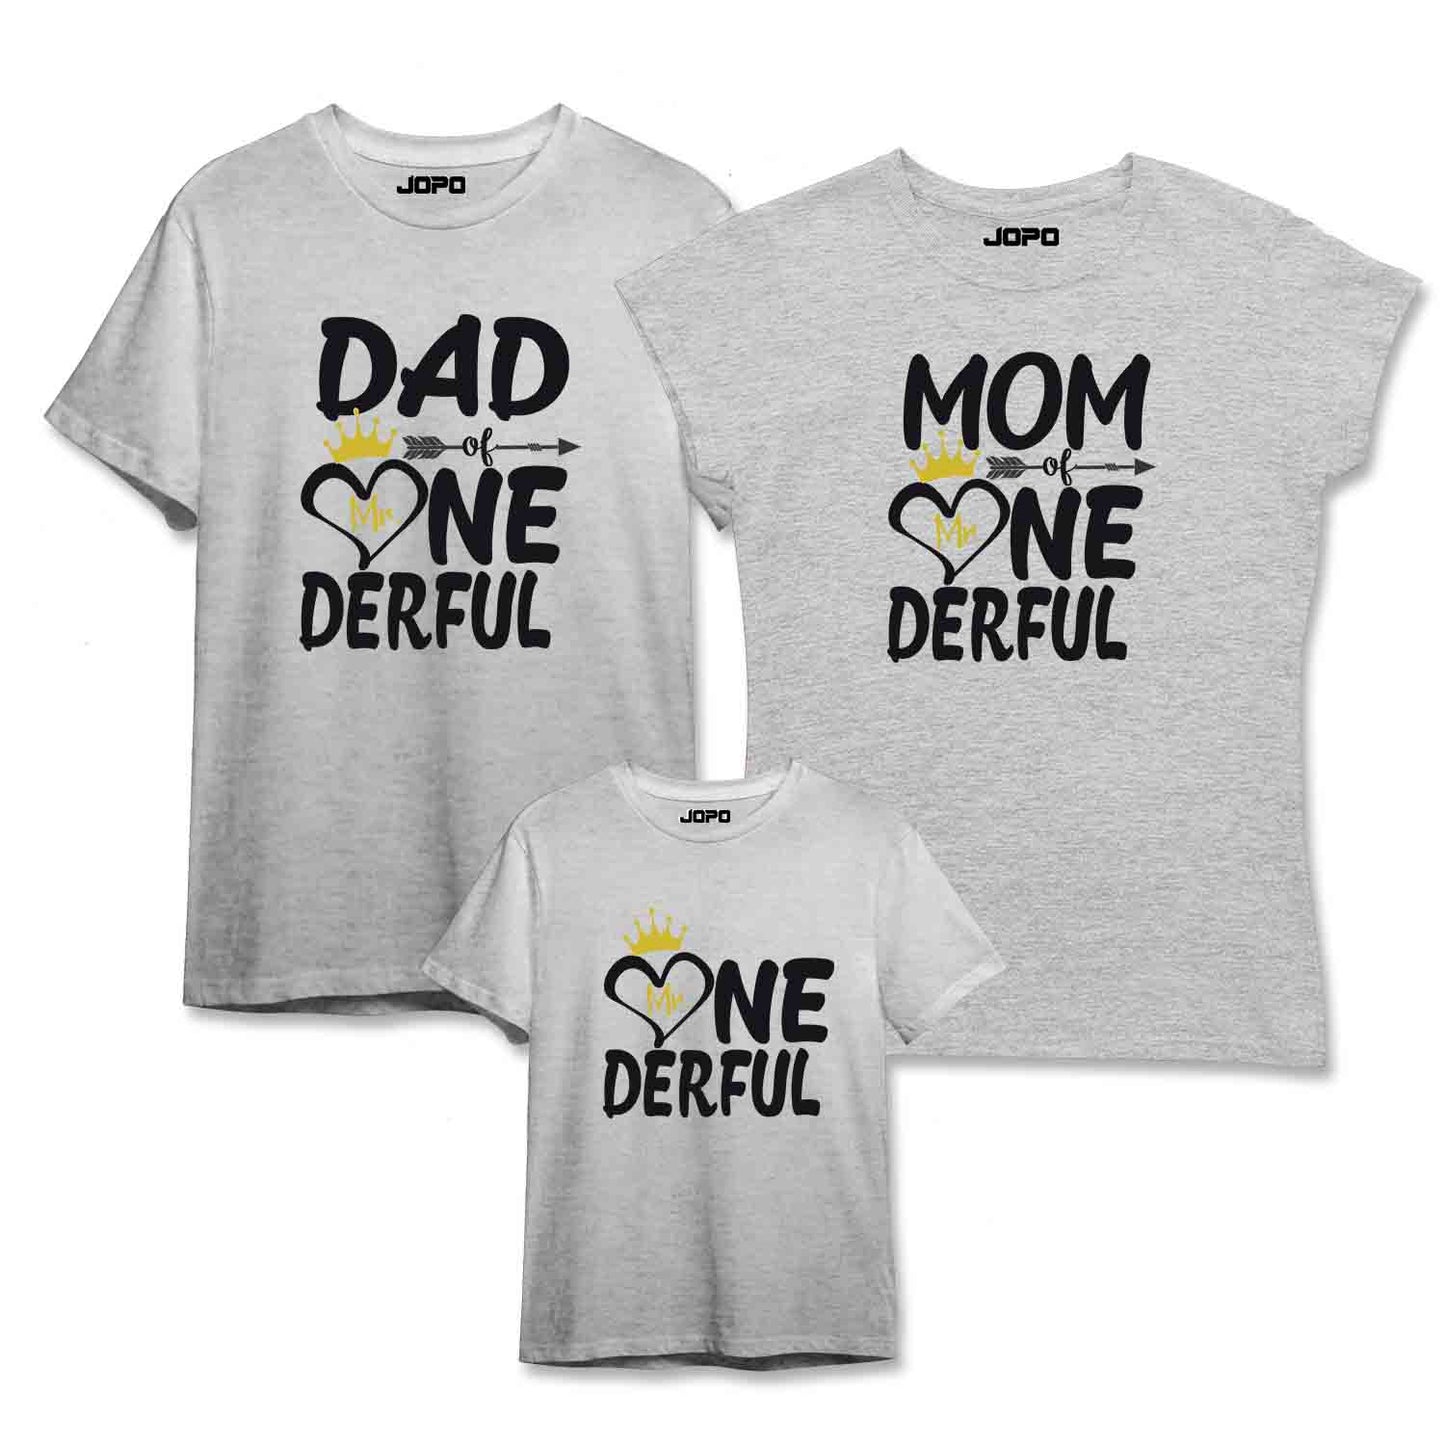 Mr.ONEderful-Baby Boy's 1st Birthday Party Family Tees